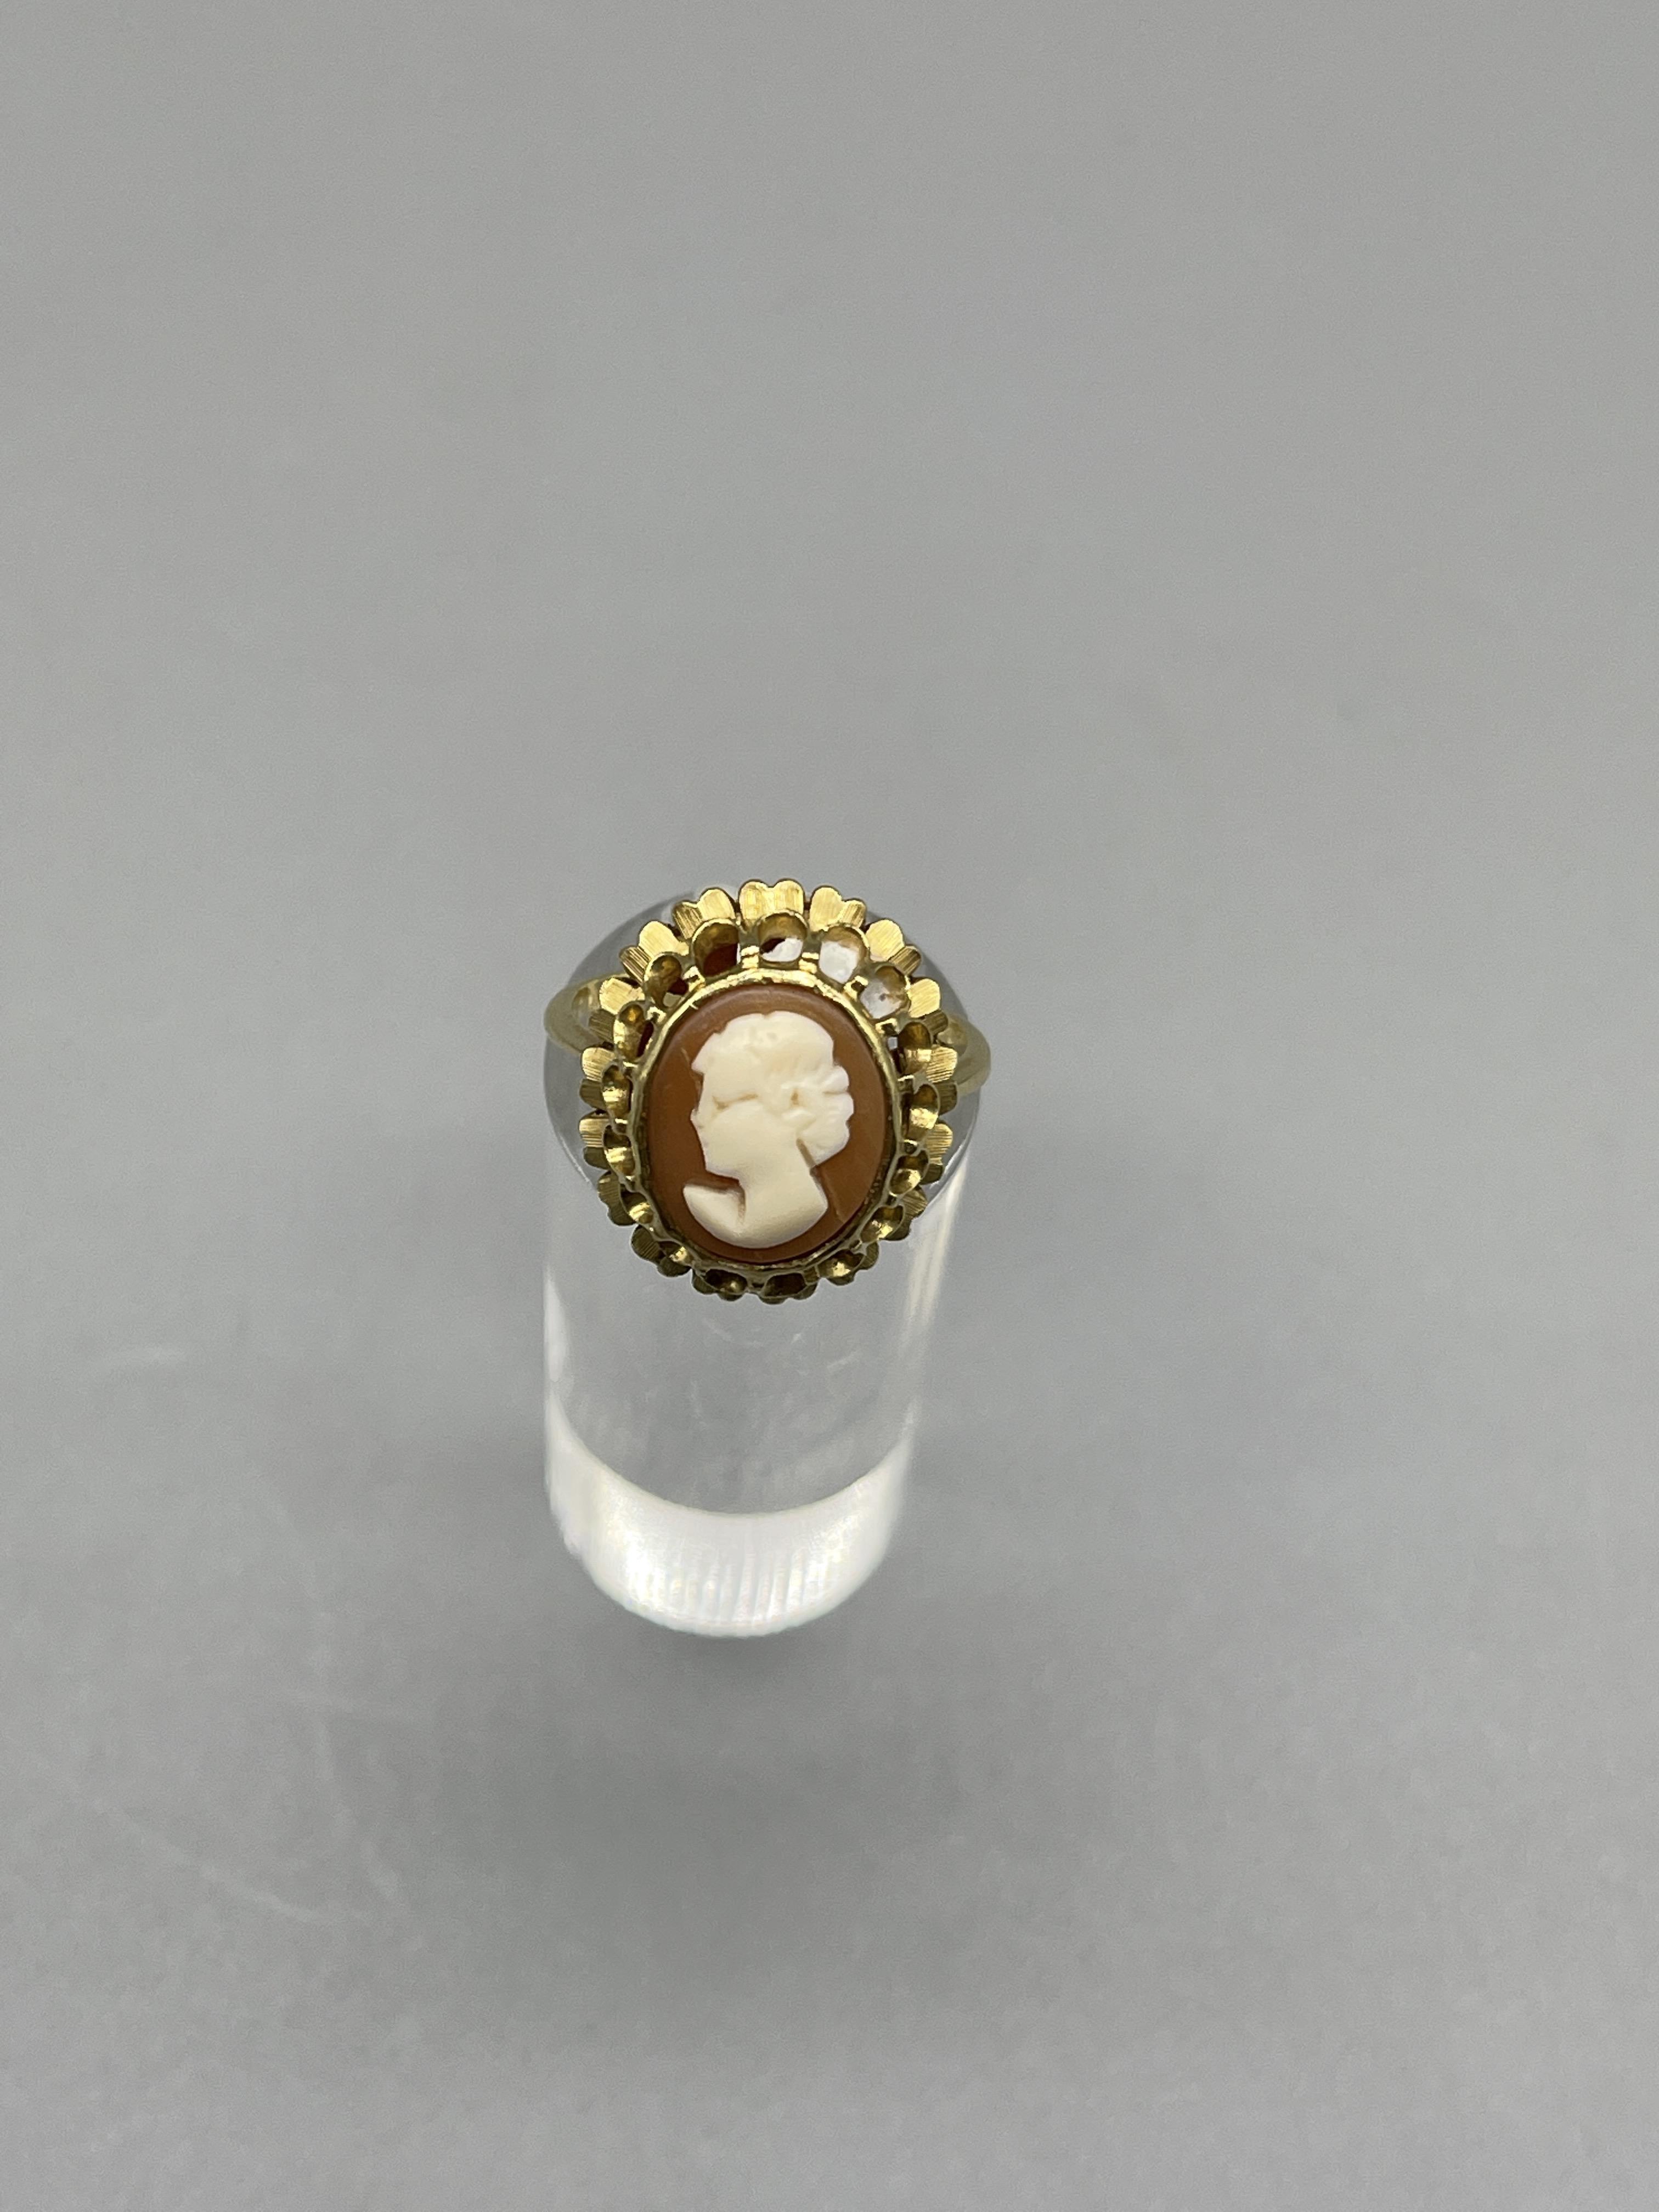 9ct cameo dress ring - Image 5 of 7